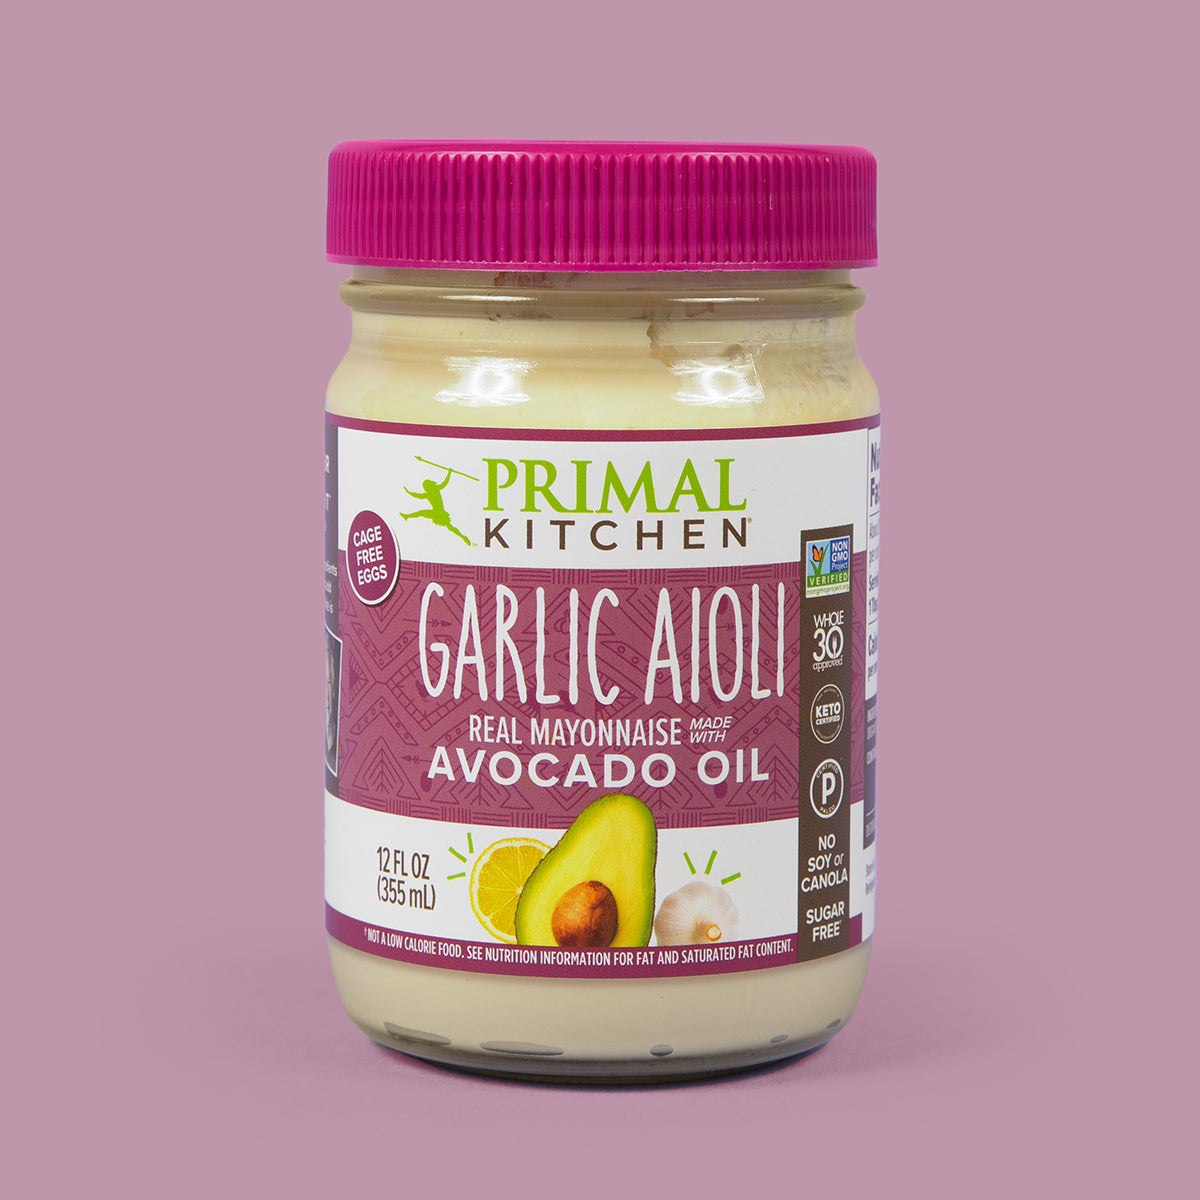 A jar of Primal Kitchen Garlic Aioli Mayo made with Avocado Oil with a purple label and lid on a light pink background.